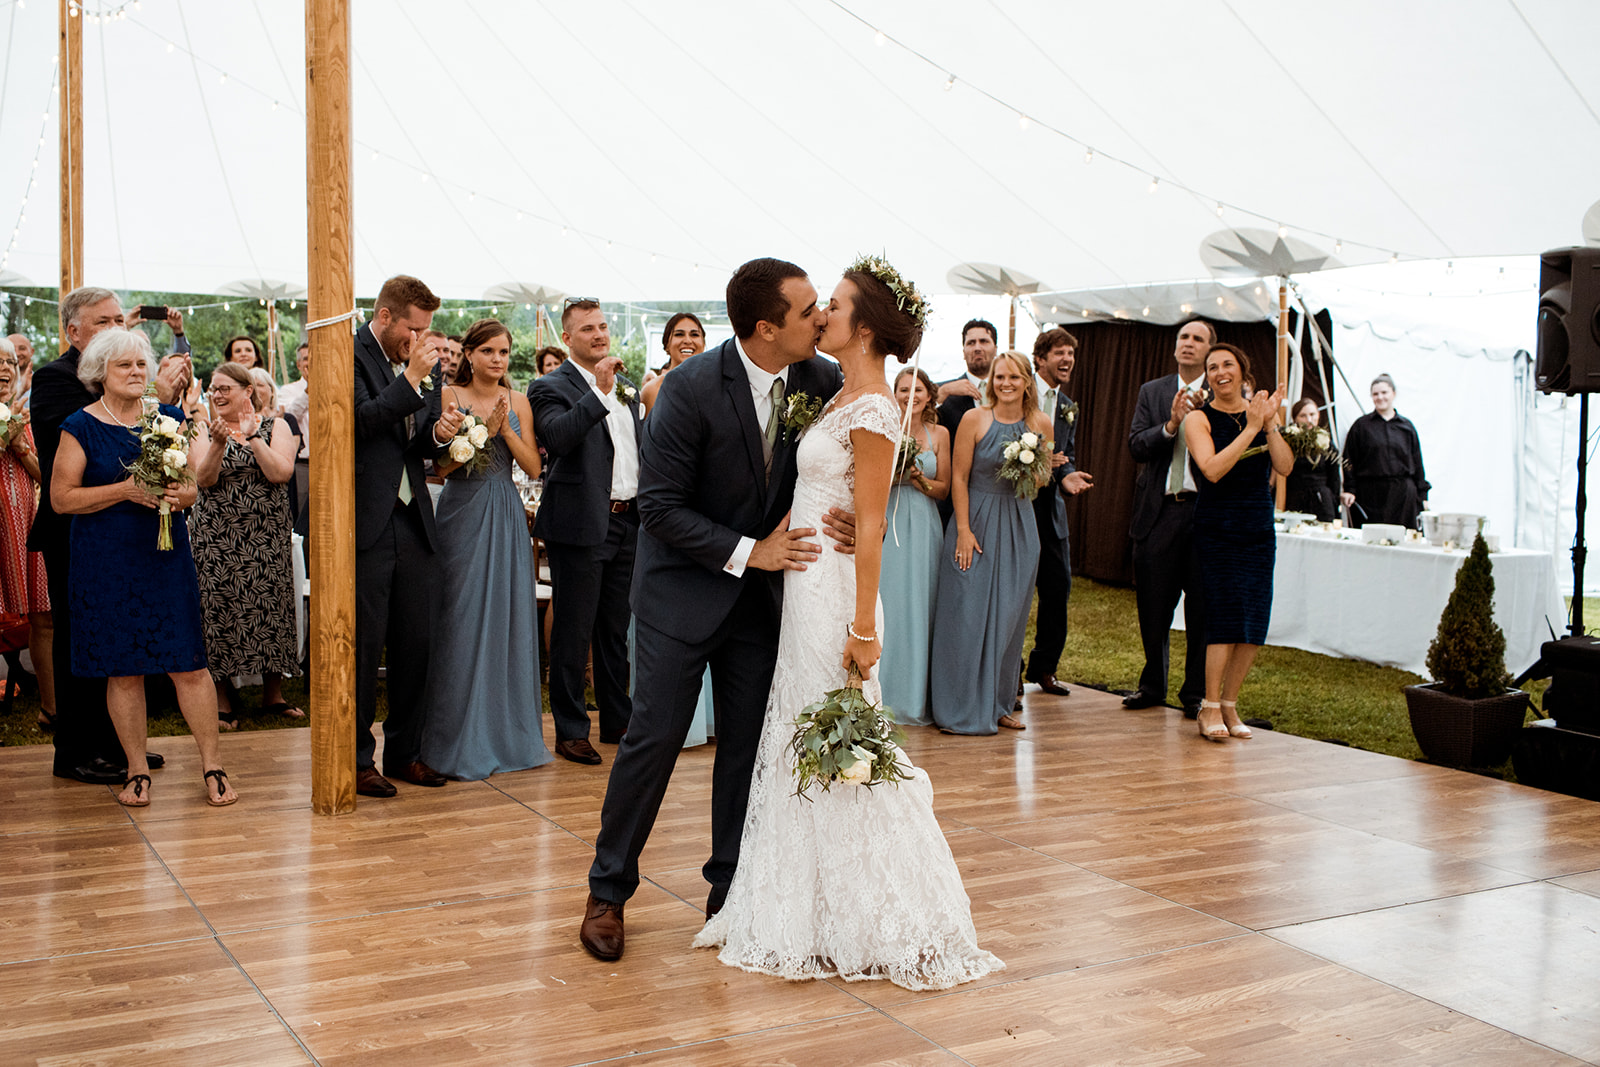 Outdoor Tented Backyard Wedding at Private Residence in Chester, CT | Sommar & Ben - Pearl Weddings & Events